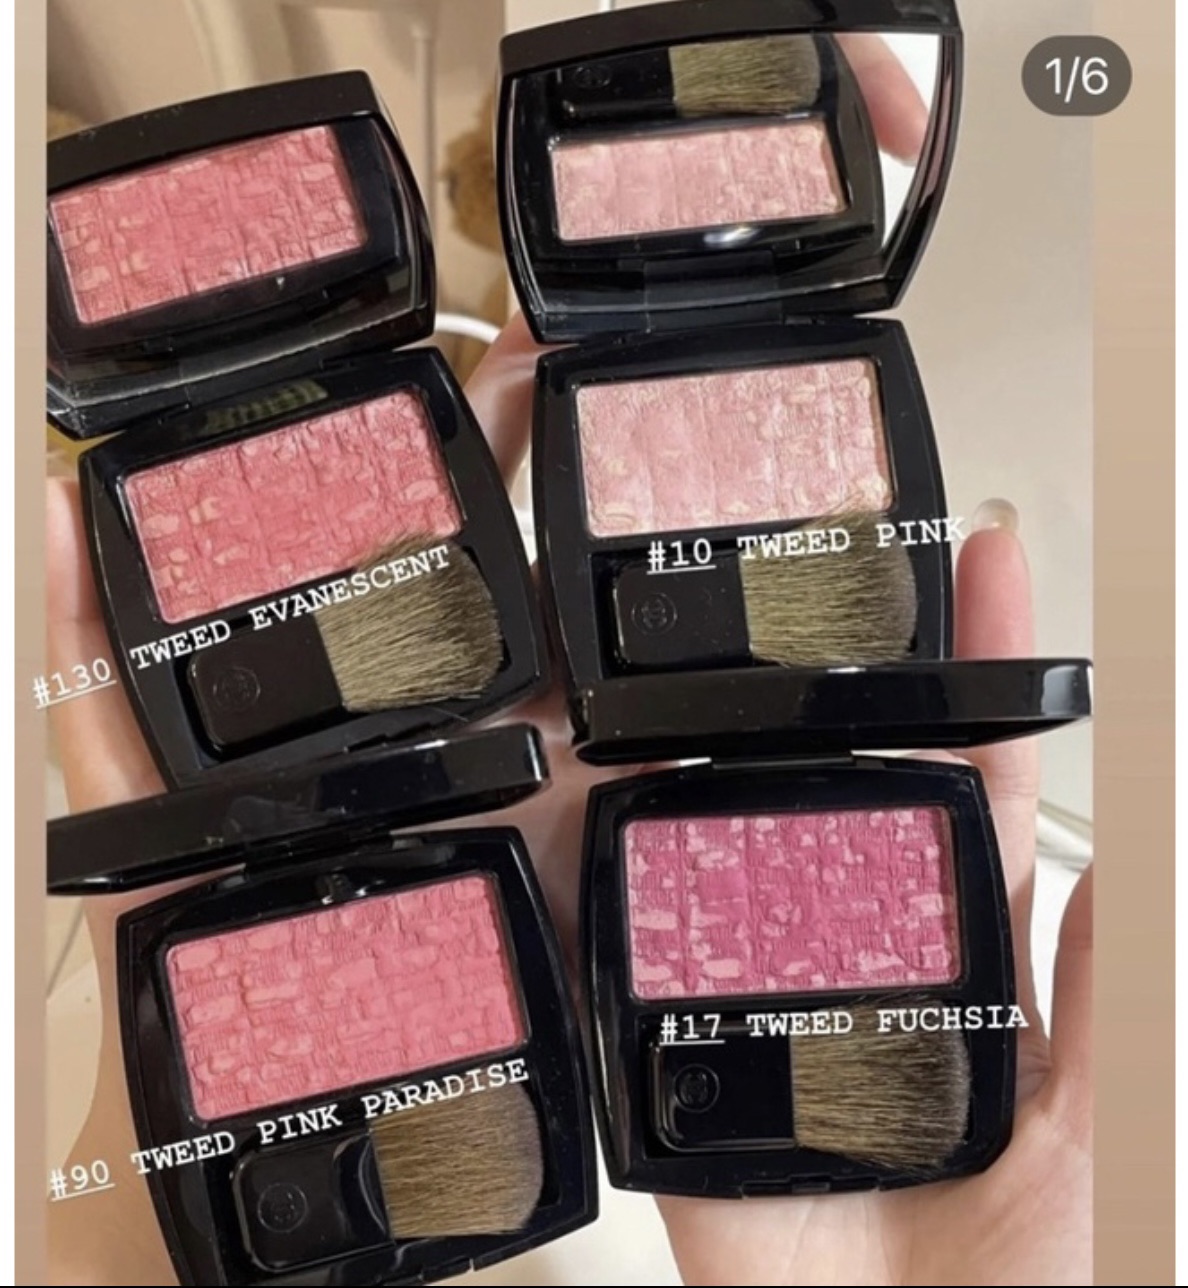 Chanel Les Tissages de Chanel Blush Duo Tweed Effect 90 Tweed Pink Paradise